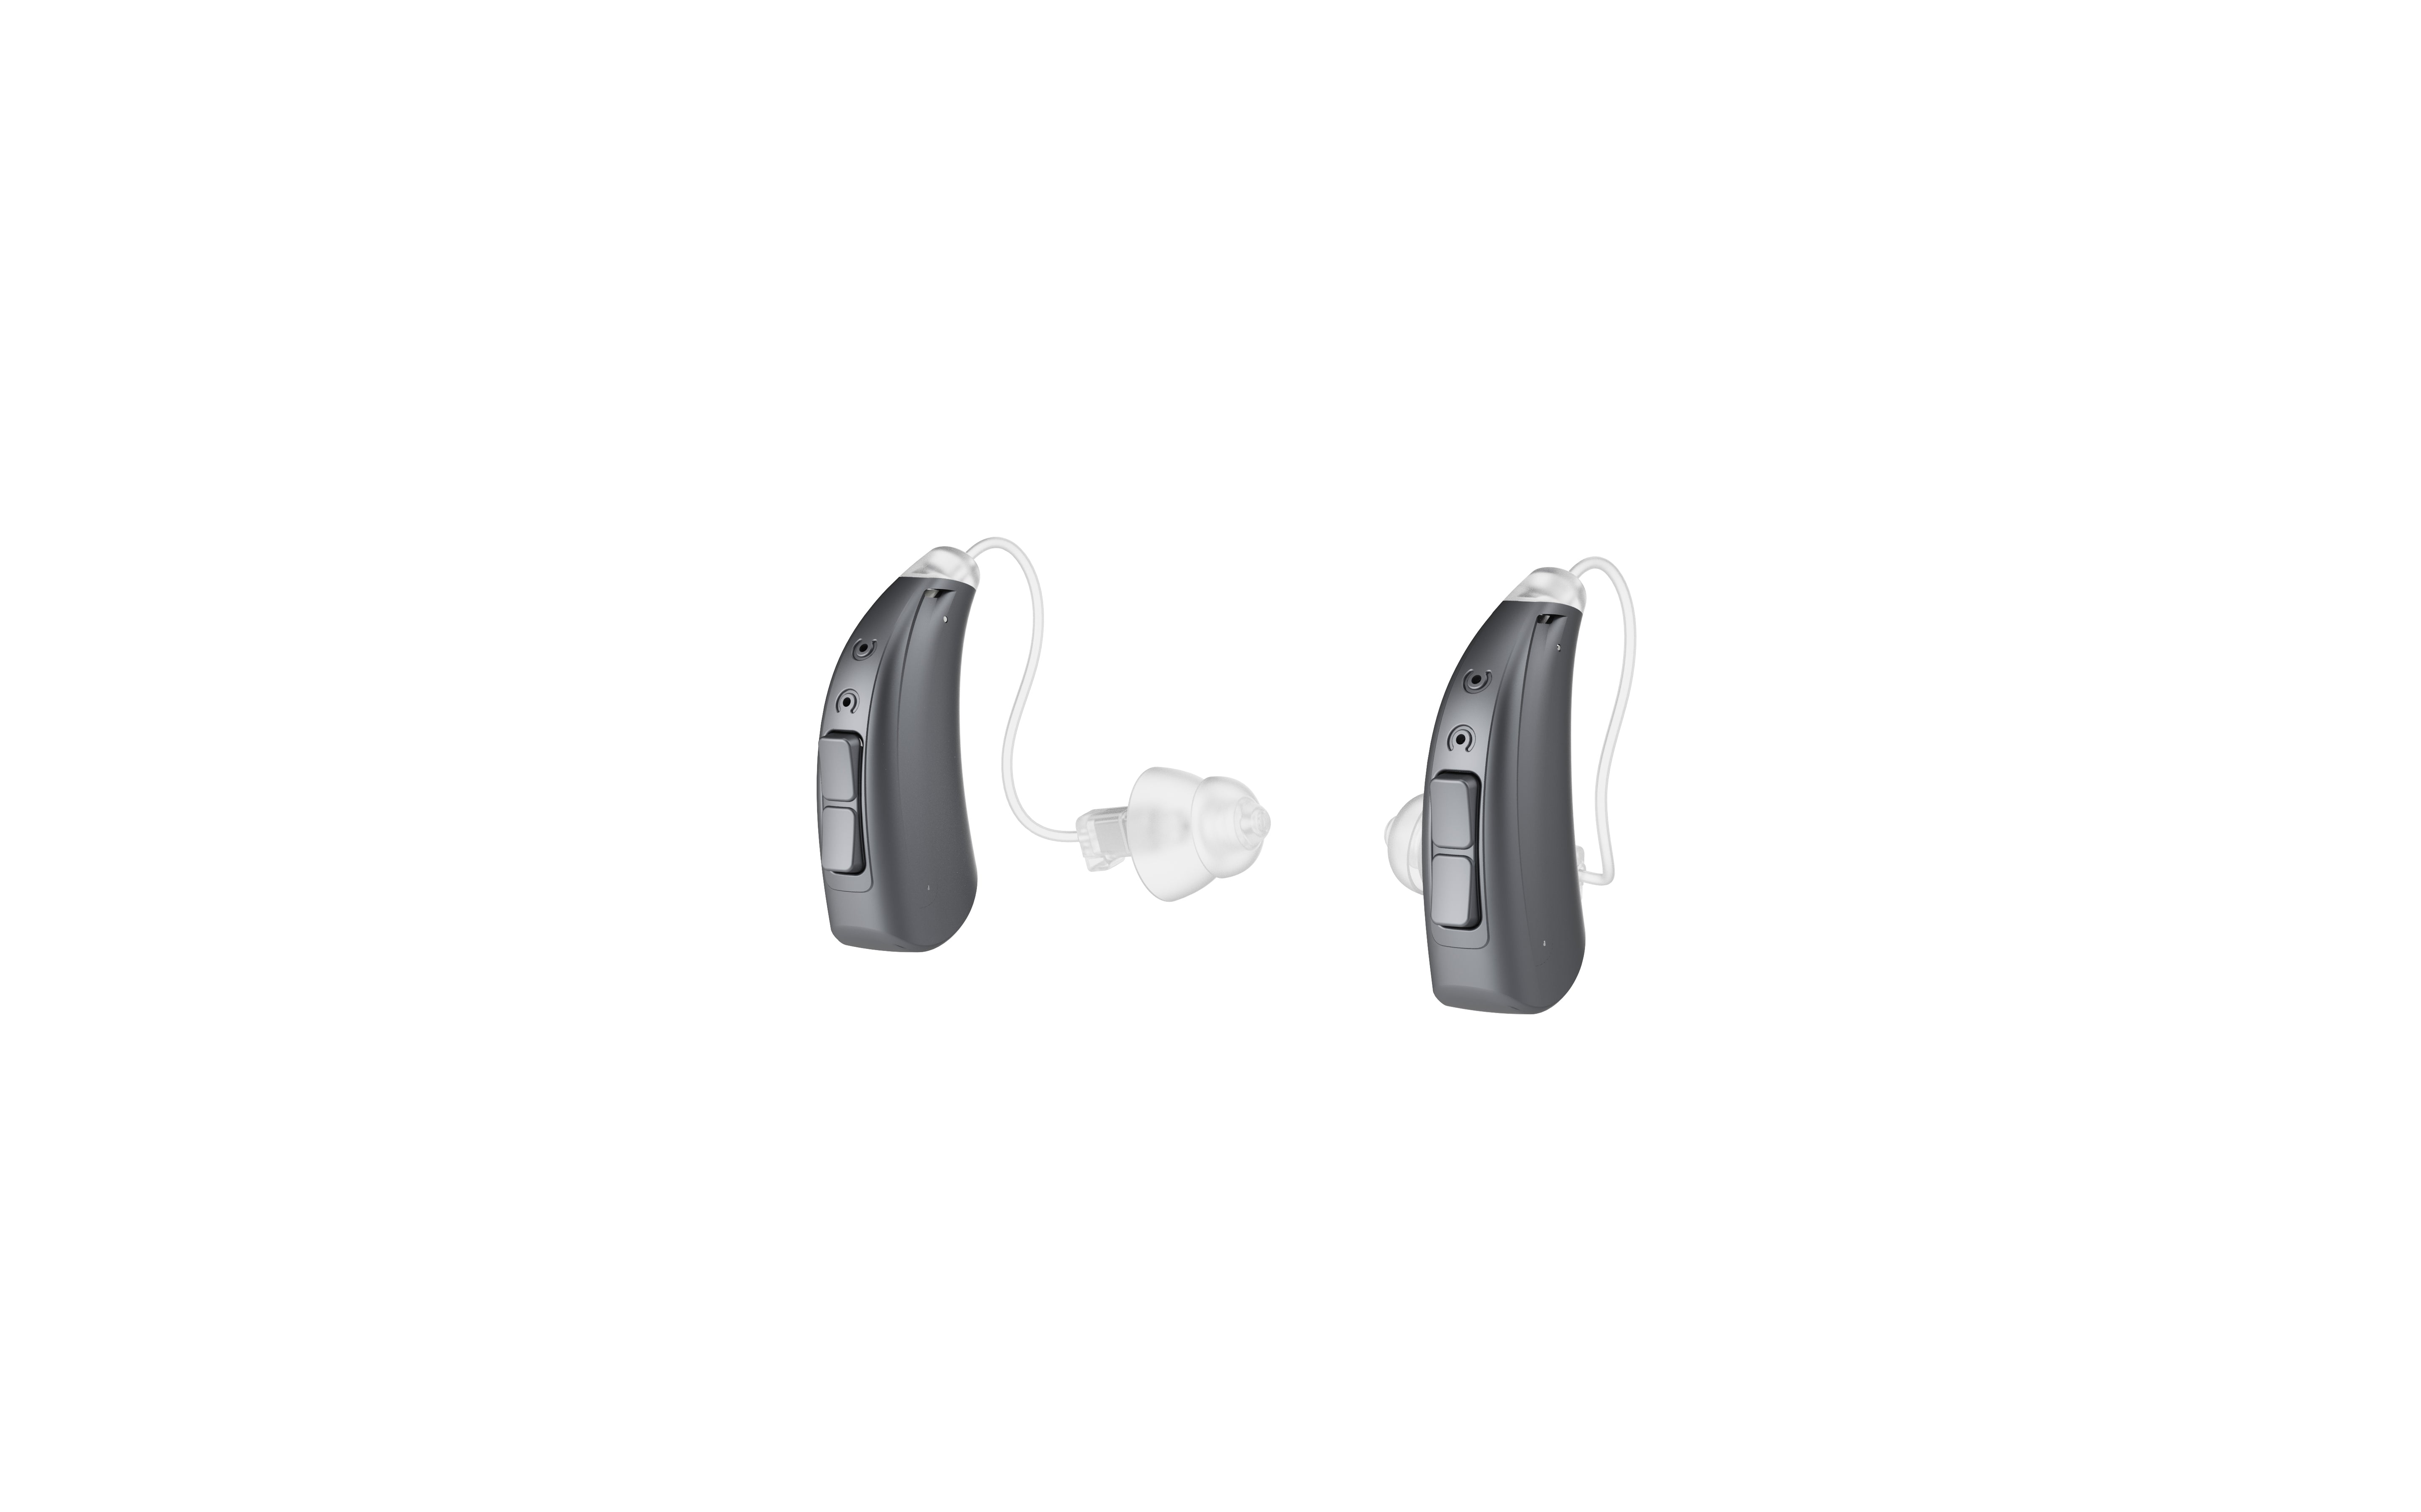 Hearing aids from the back showing volume toggle and power switch - black